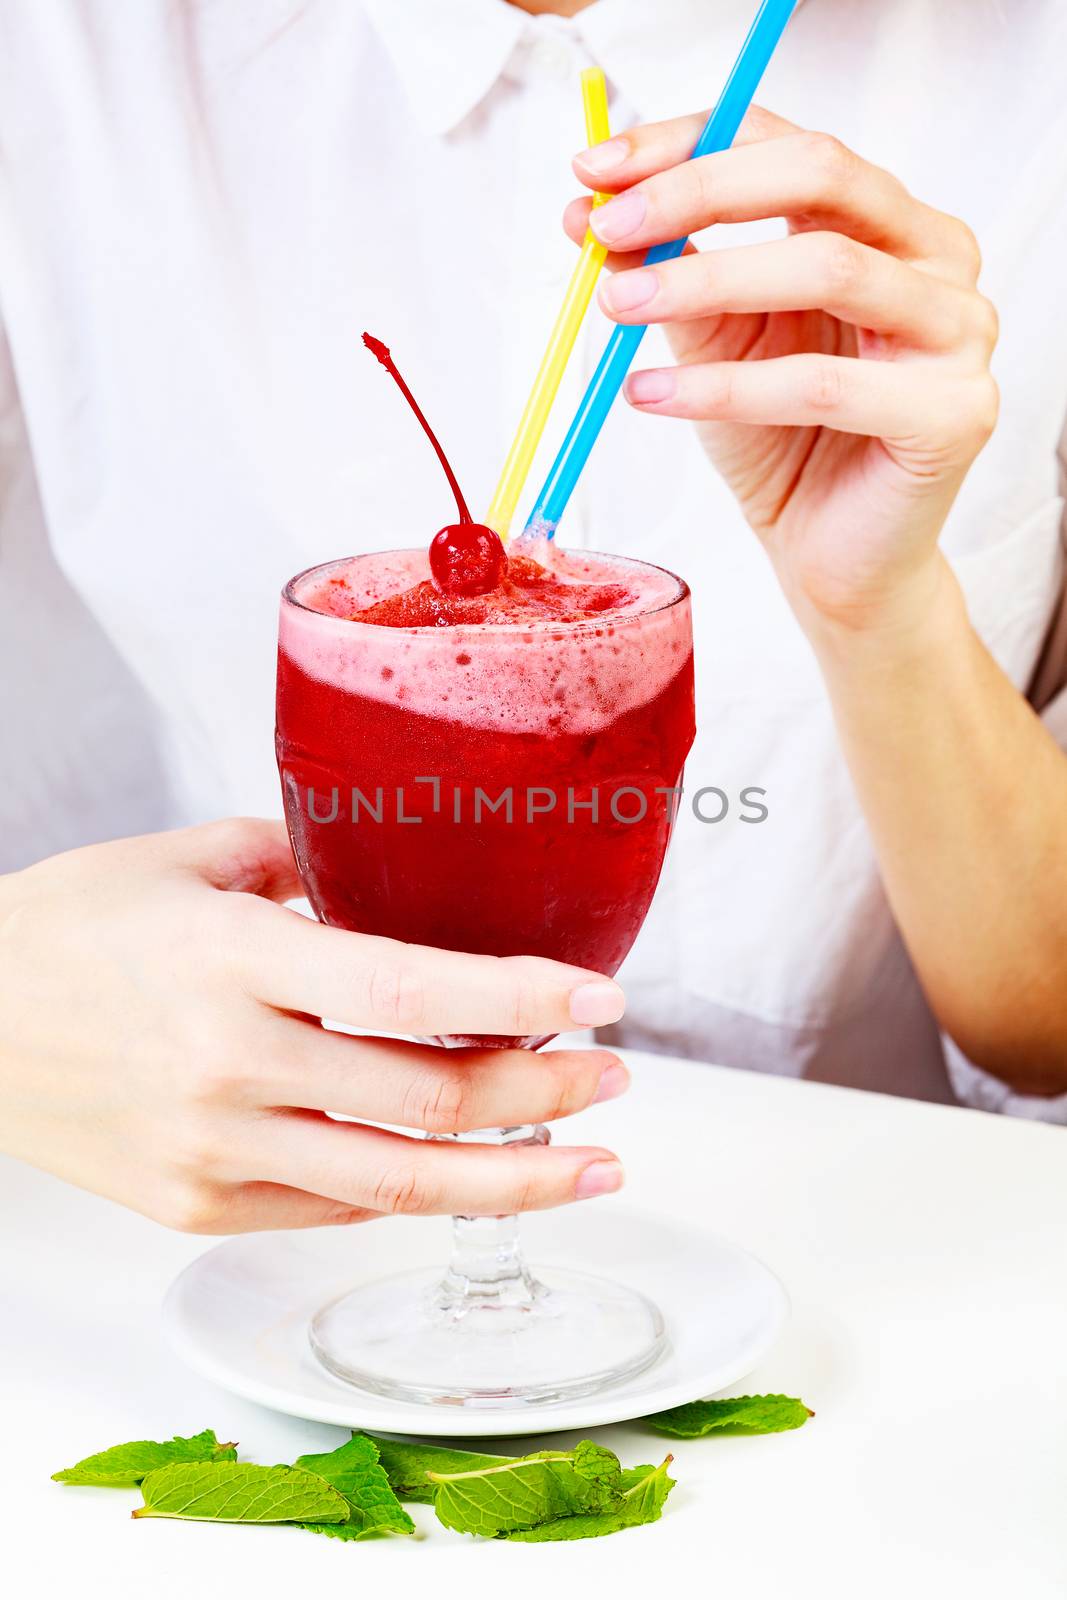 Cherry smoothie in a big glass cup with two straws in woman's hands. Lady with a drink